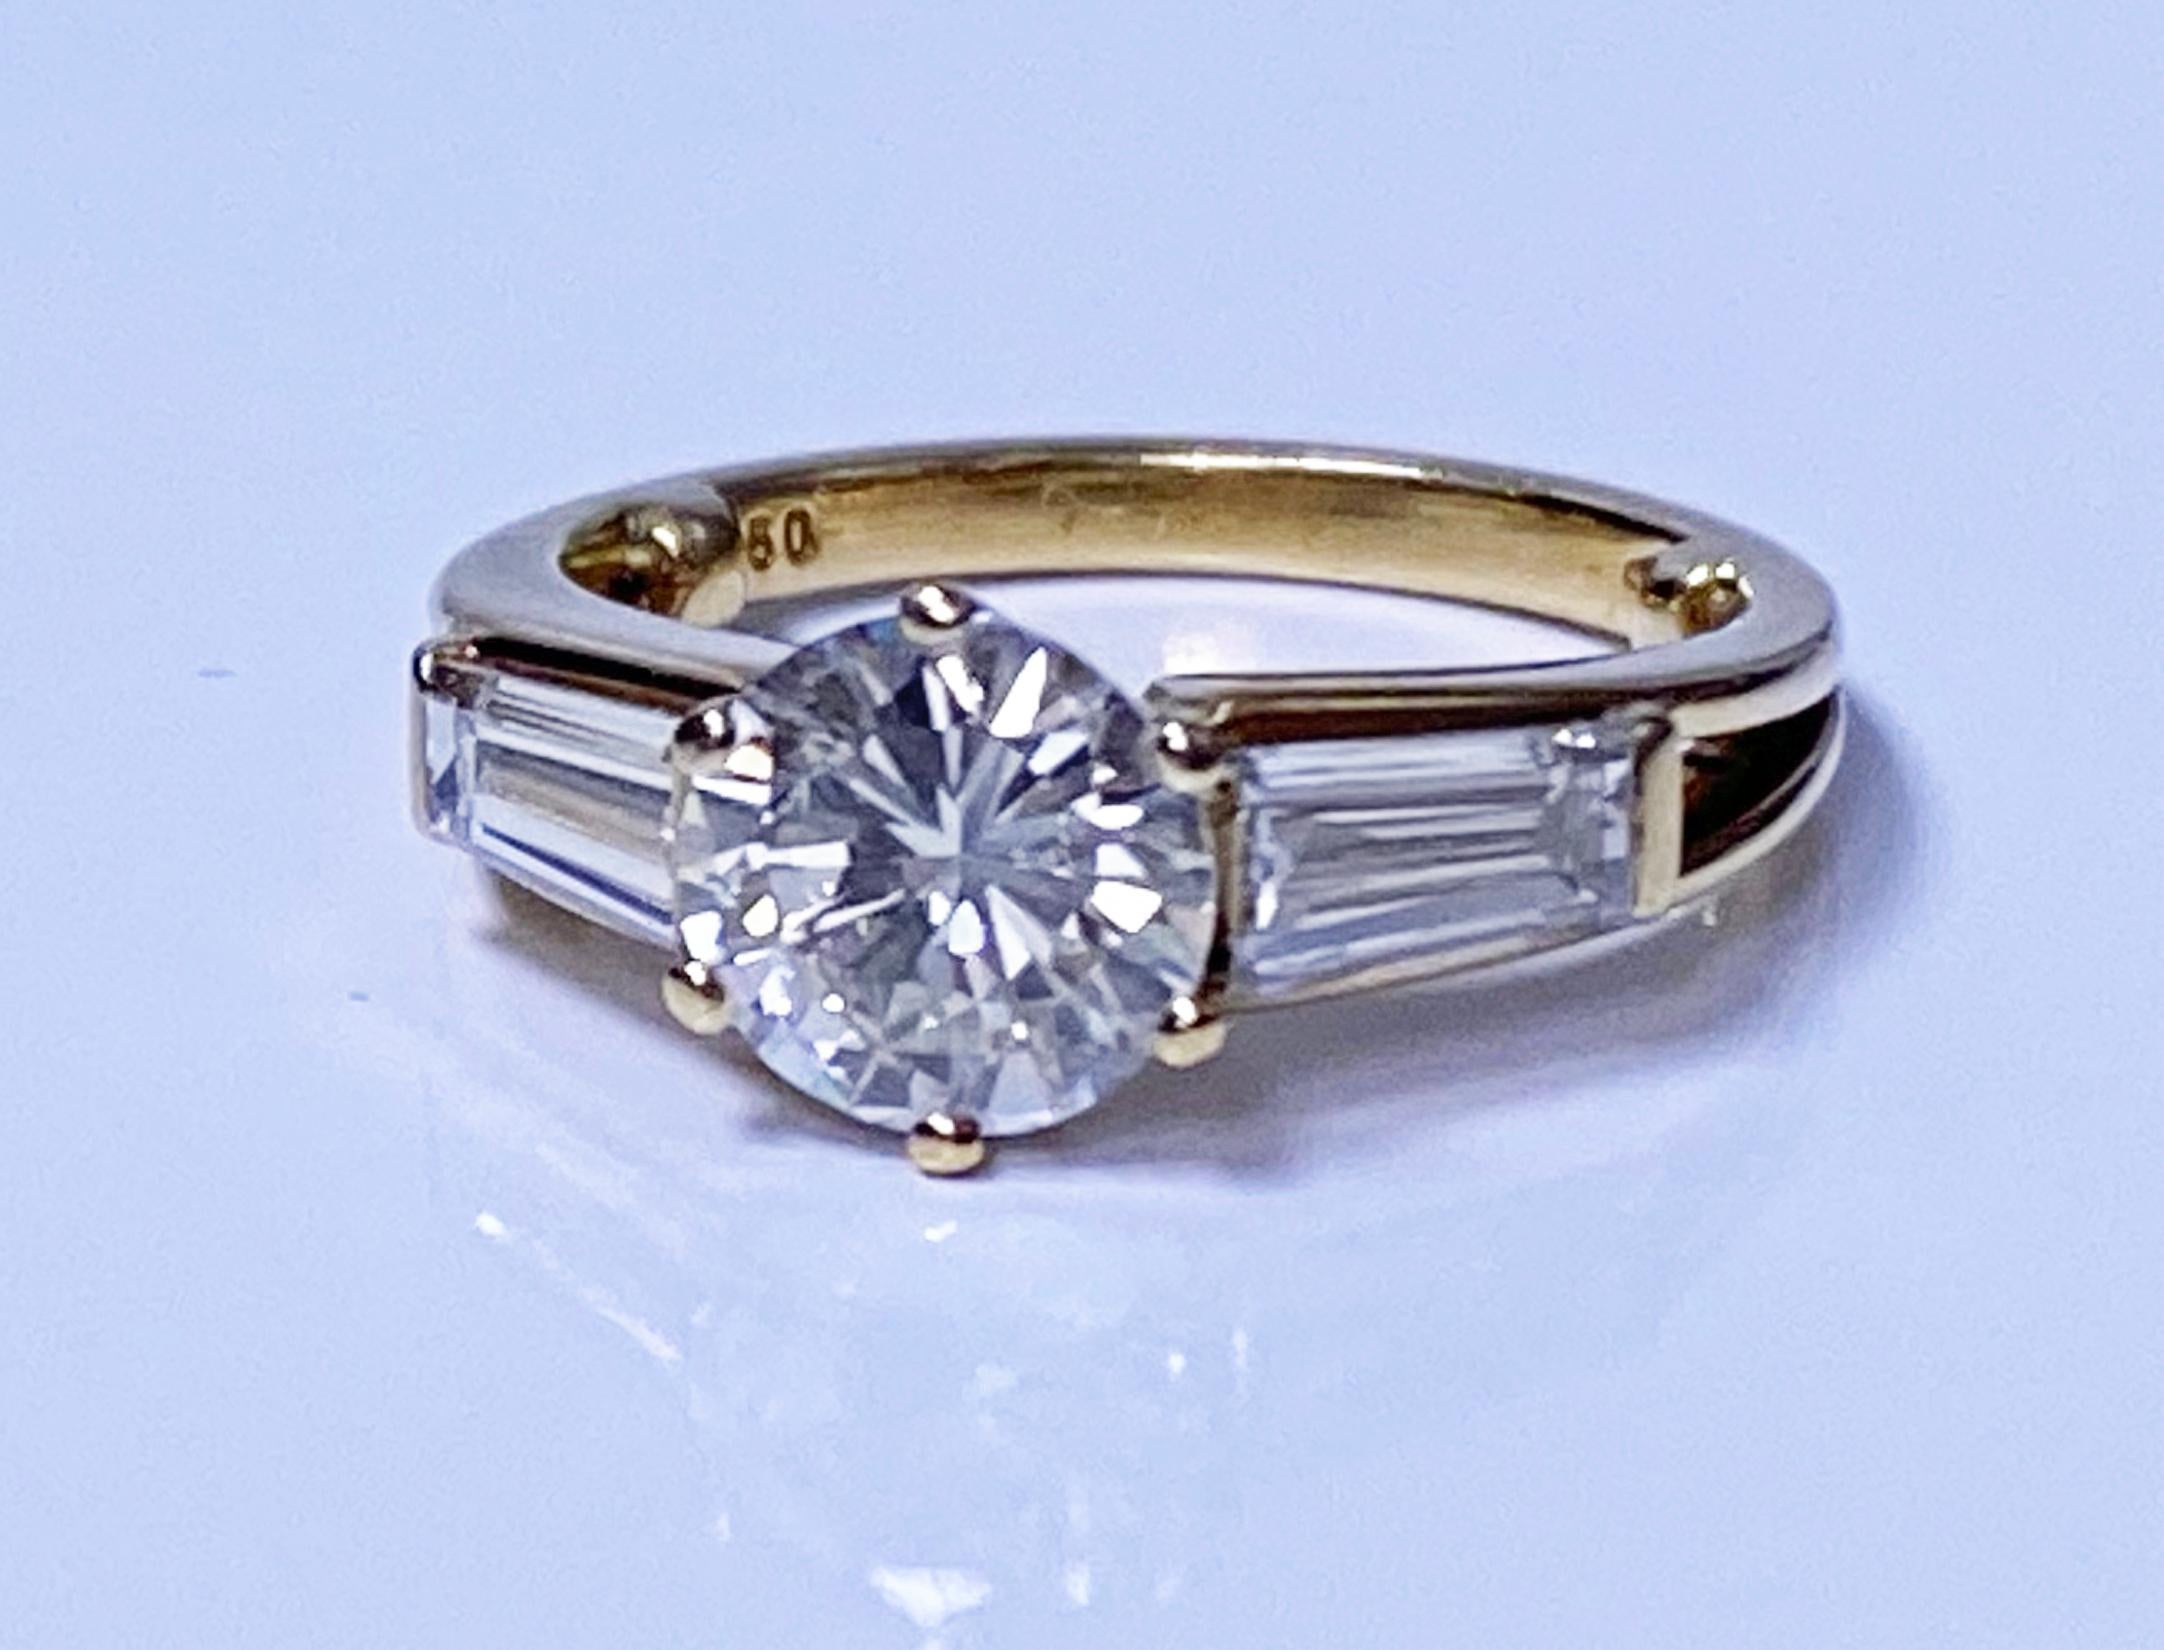 Ladies 18K yellow gold Diamond Ring. The ring set with a round brilliant cut Diamond gauging approximately 6.80 x 6.70 x 3.80 mm, weight 1.06 cts, VS1 clarity, I colour, flanked on either side with a tapered baguette cut diamond, each approximately